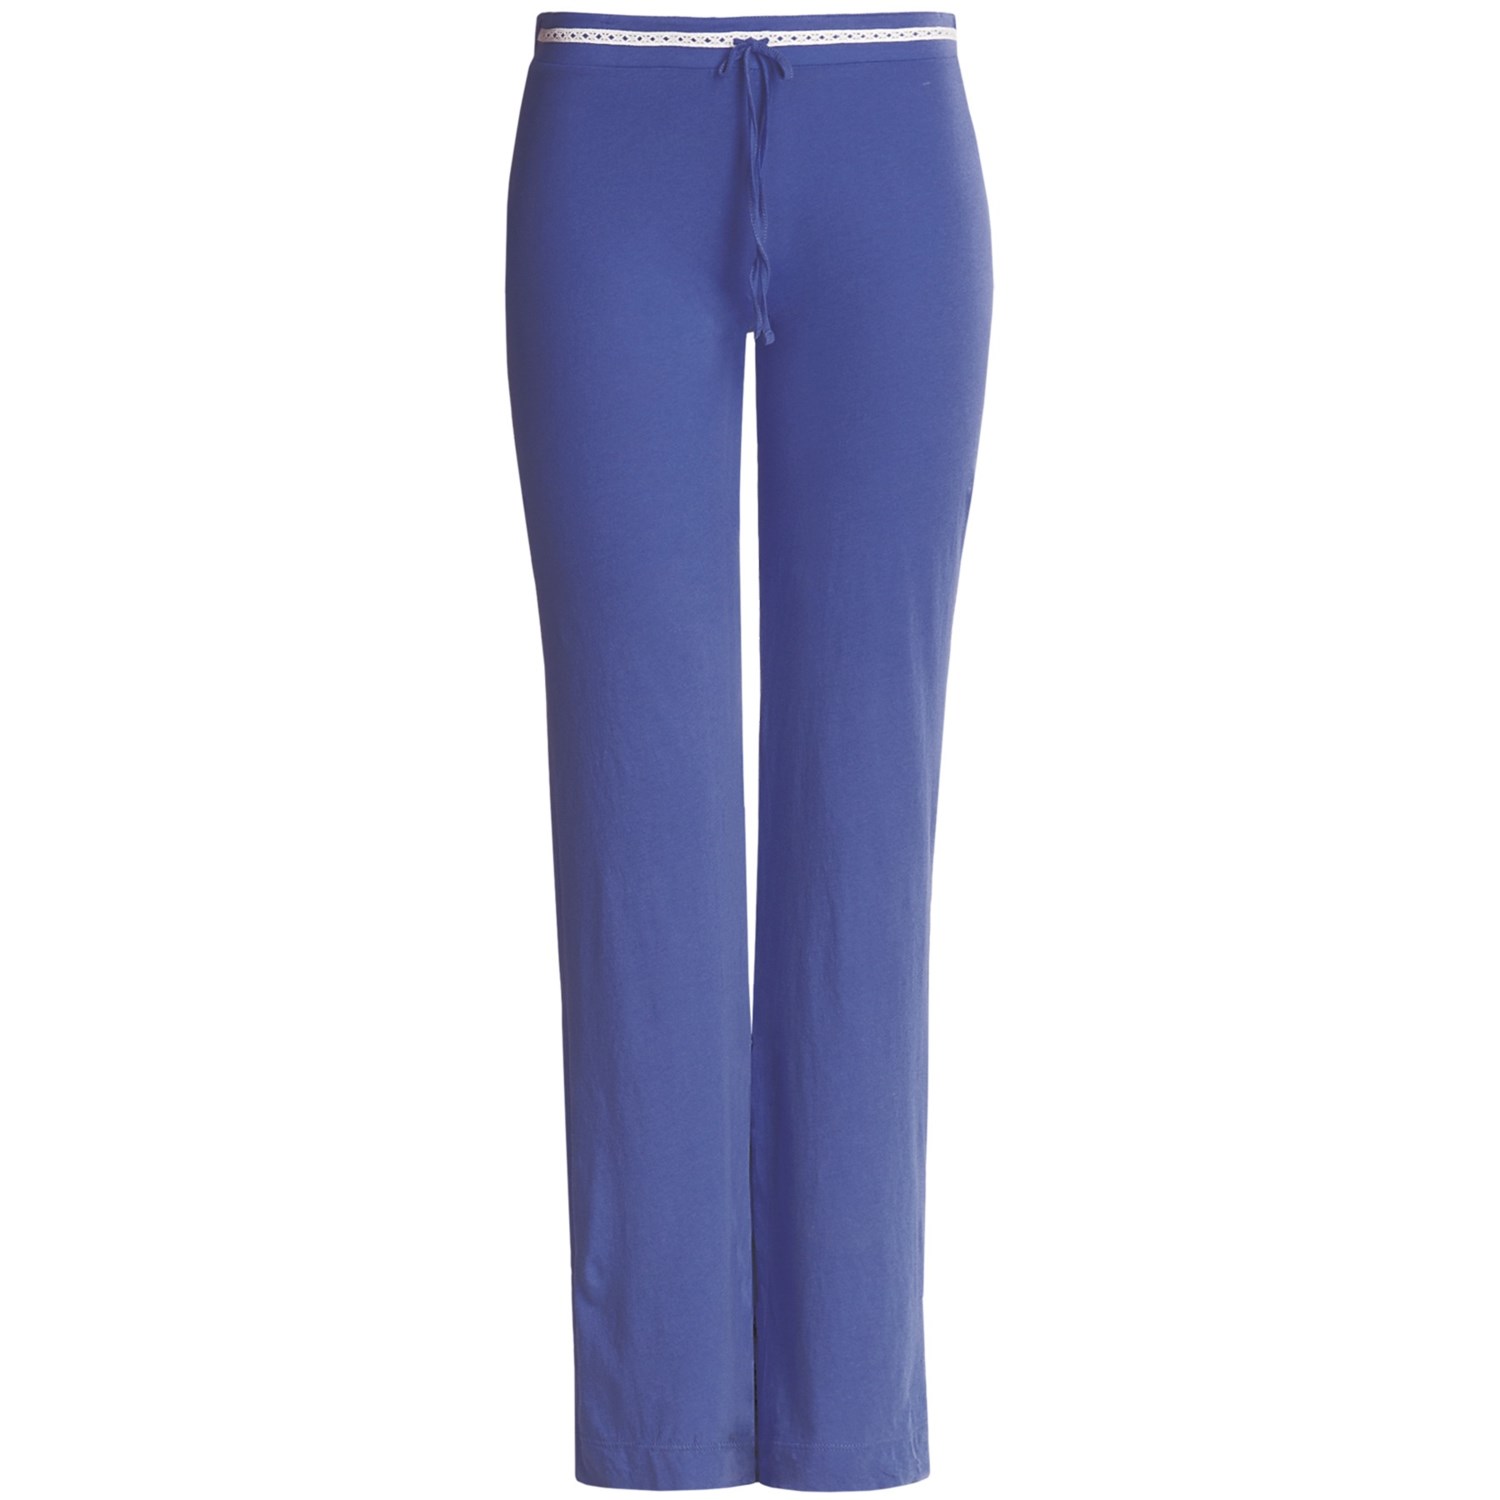 Arianne Pima Cotton Knit Pants (For Women) 4130H - Save 50%